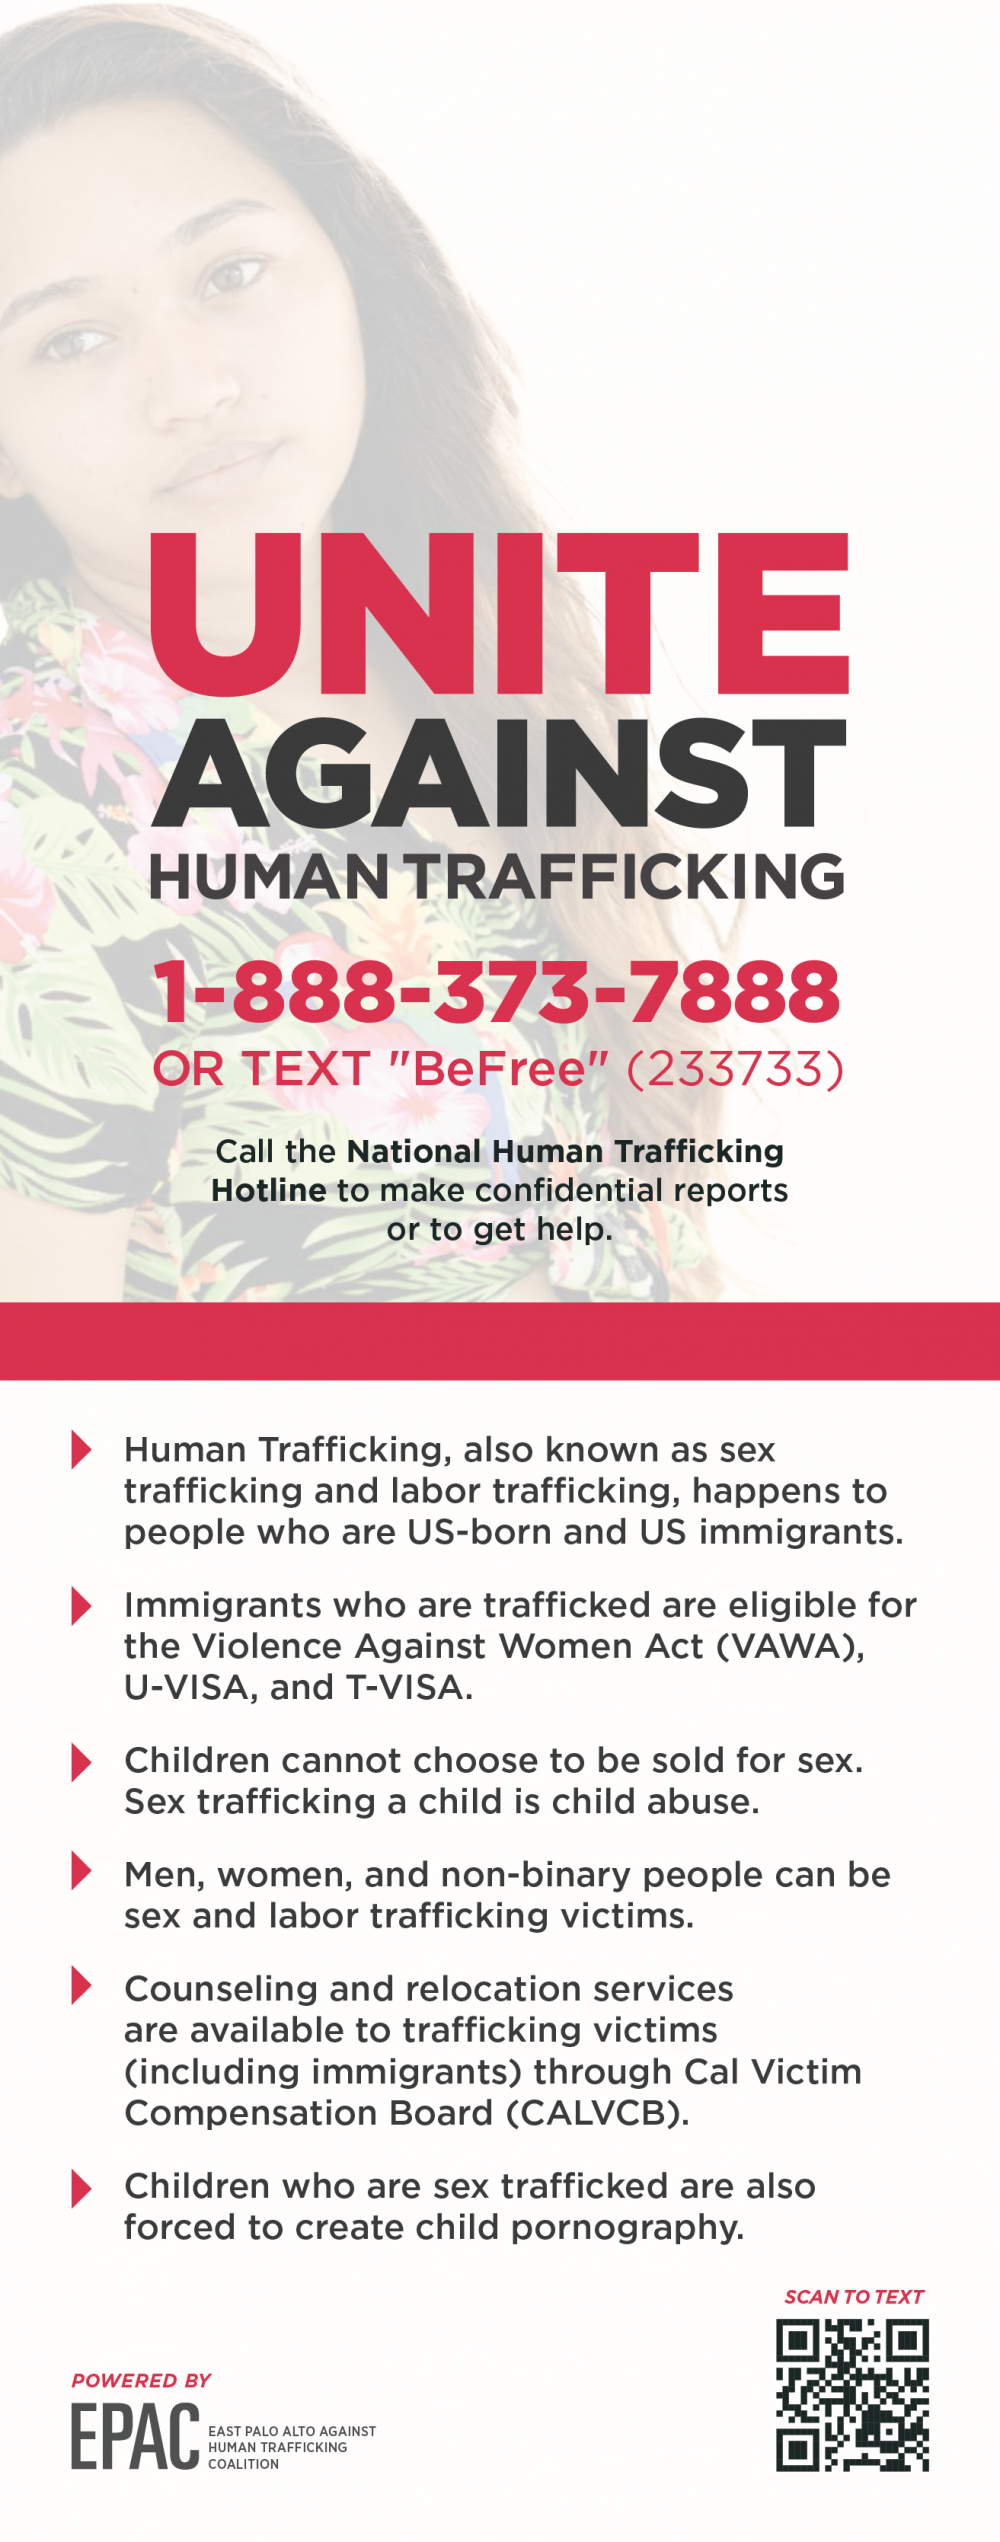 Human Trafficking Resources City of East Palo Alto pic